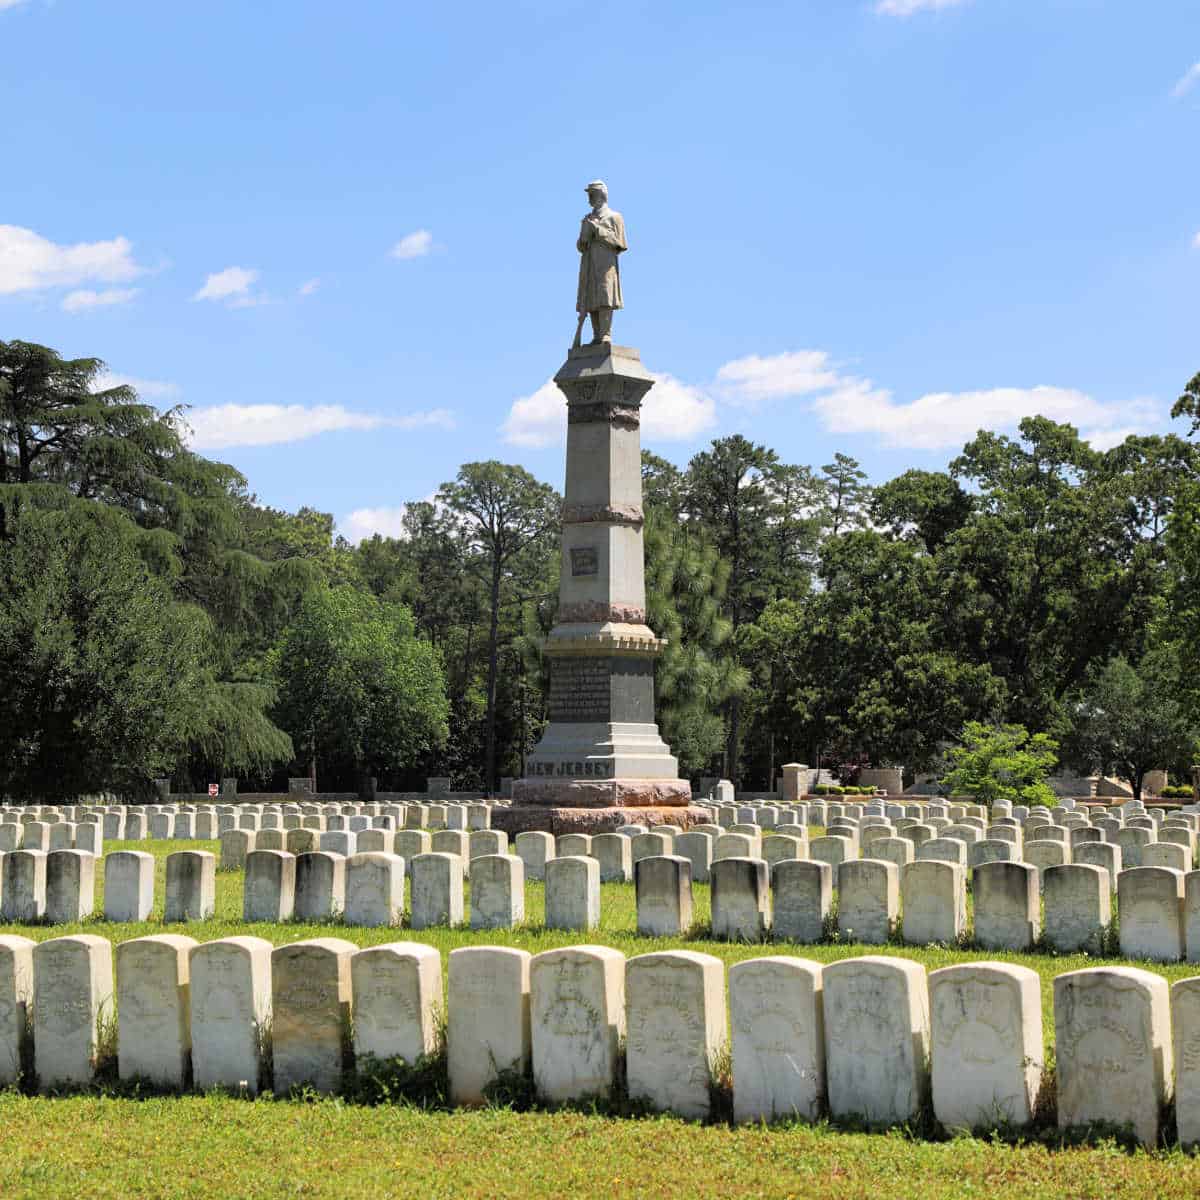 Headstones at Andersonville National Historic Site Georgia